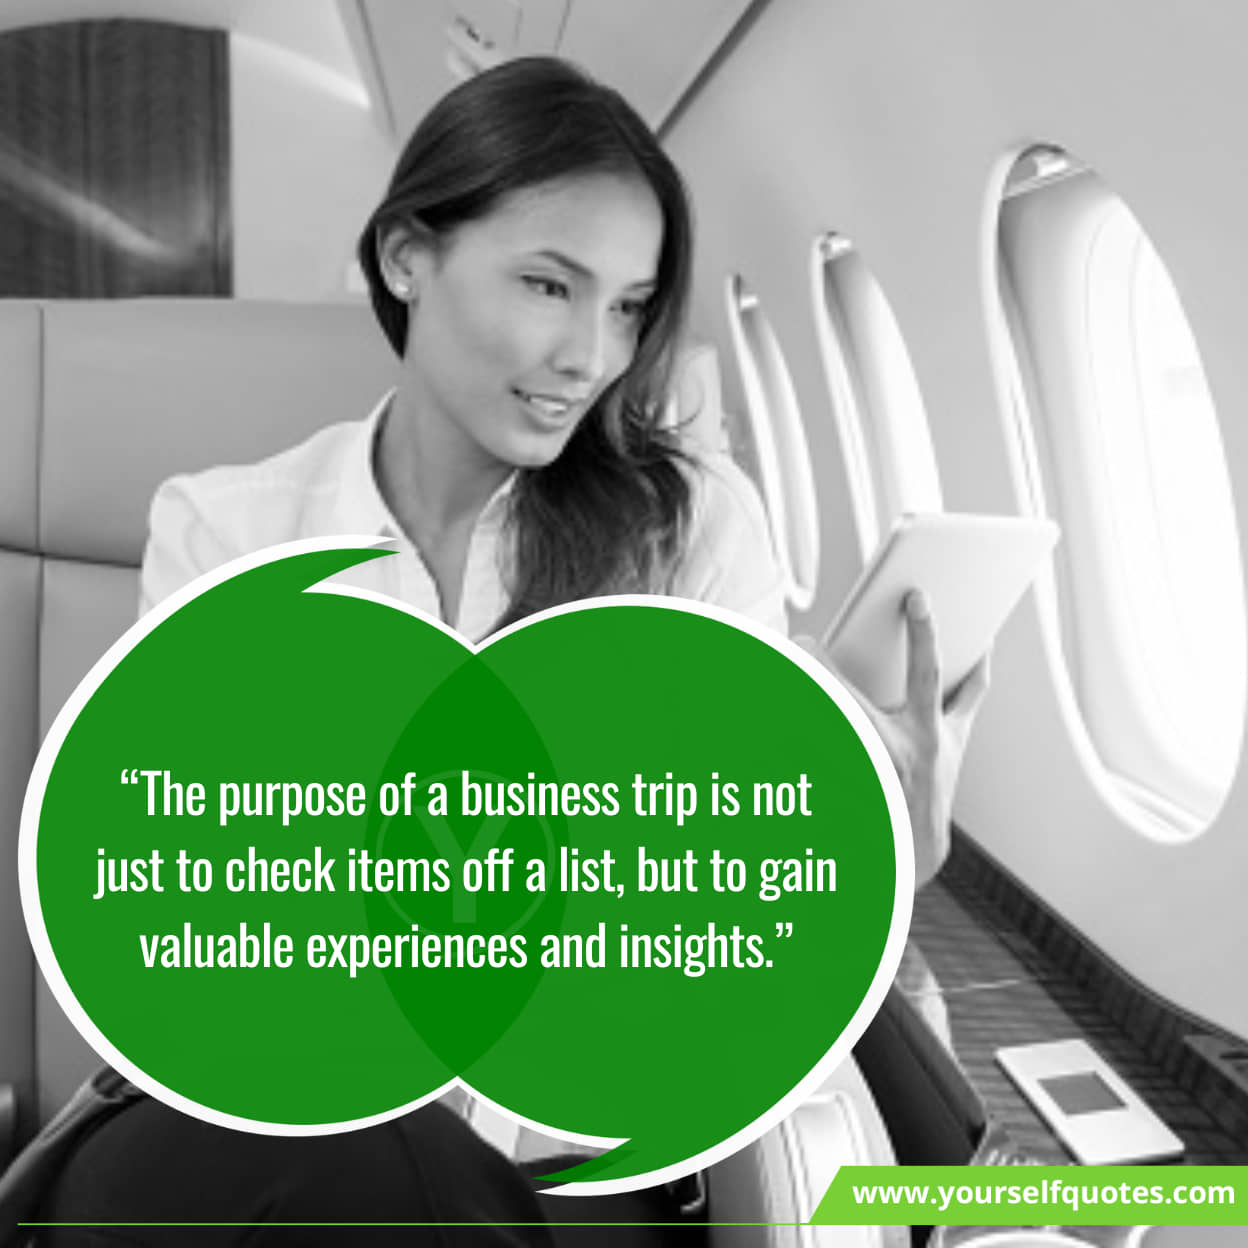 Latest Business Trip Wishes About Business Growth